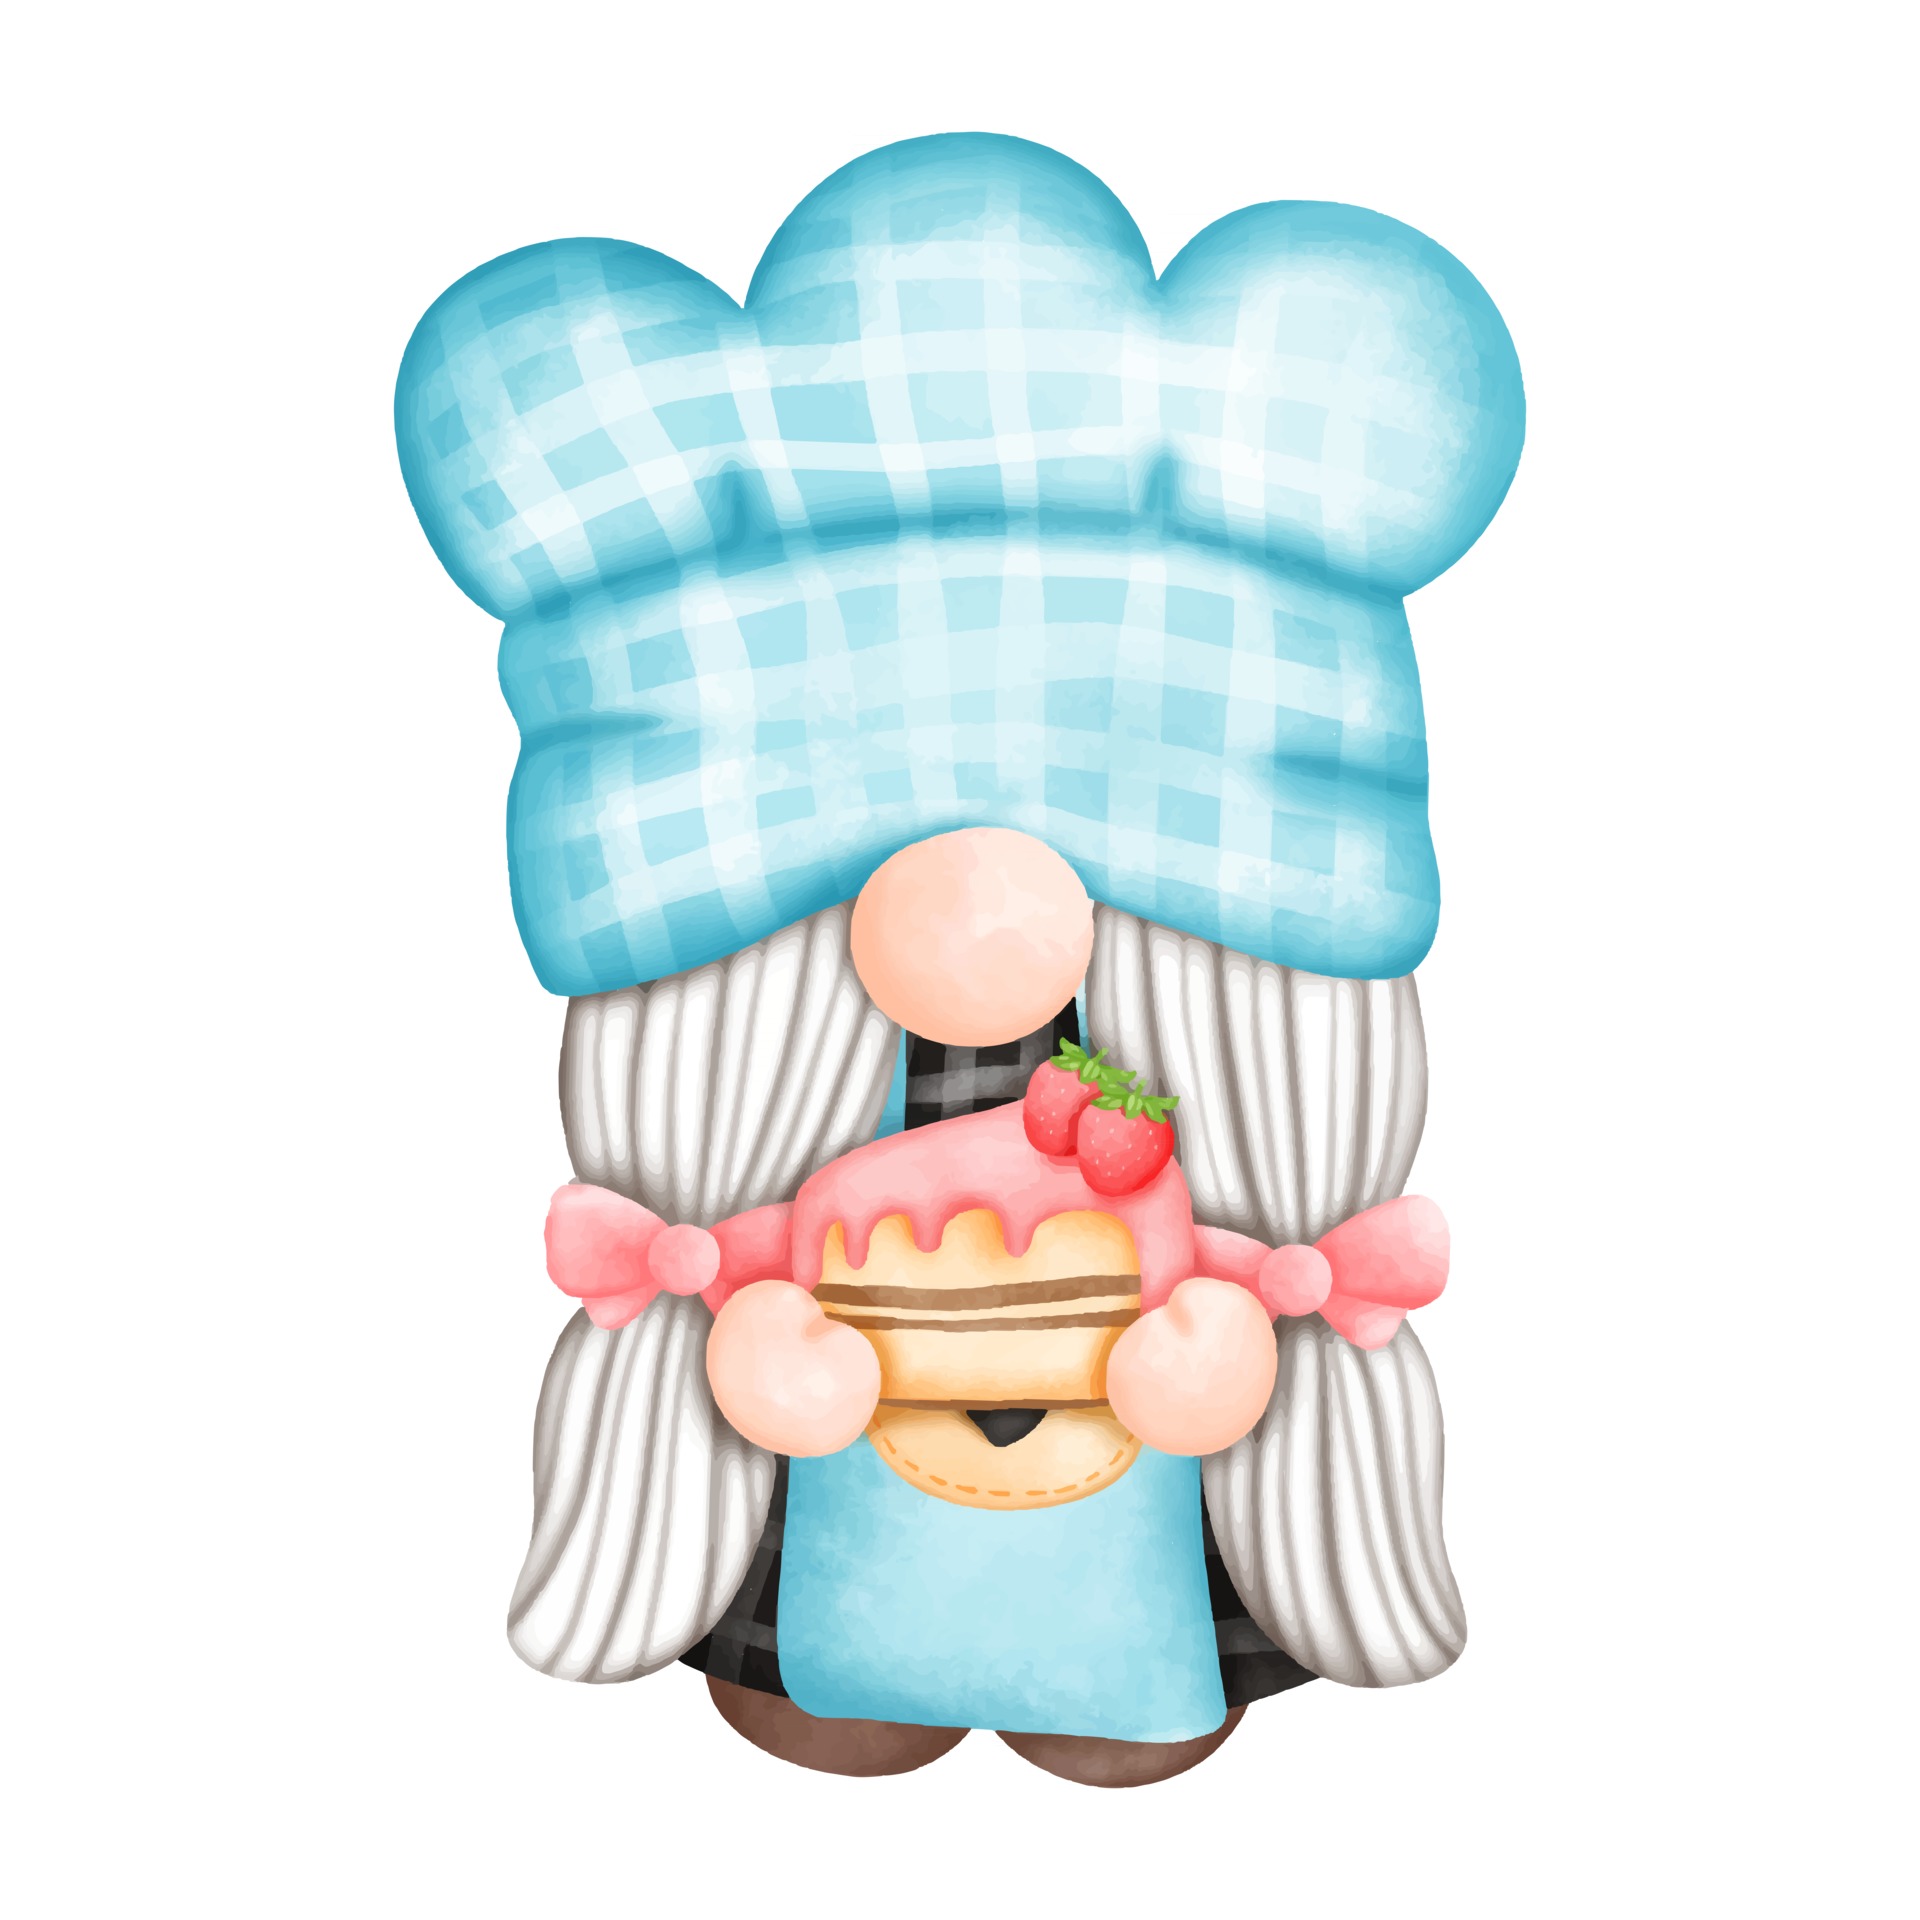 https://static.vecteezy.com/system/resources/previews/002/896/979/original/digital-painting-watercolor-gnome-chef-baker-gnome-in-the-kitchen-illustration-vector.jpg